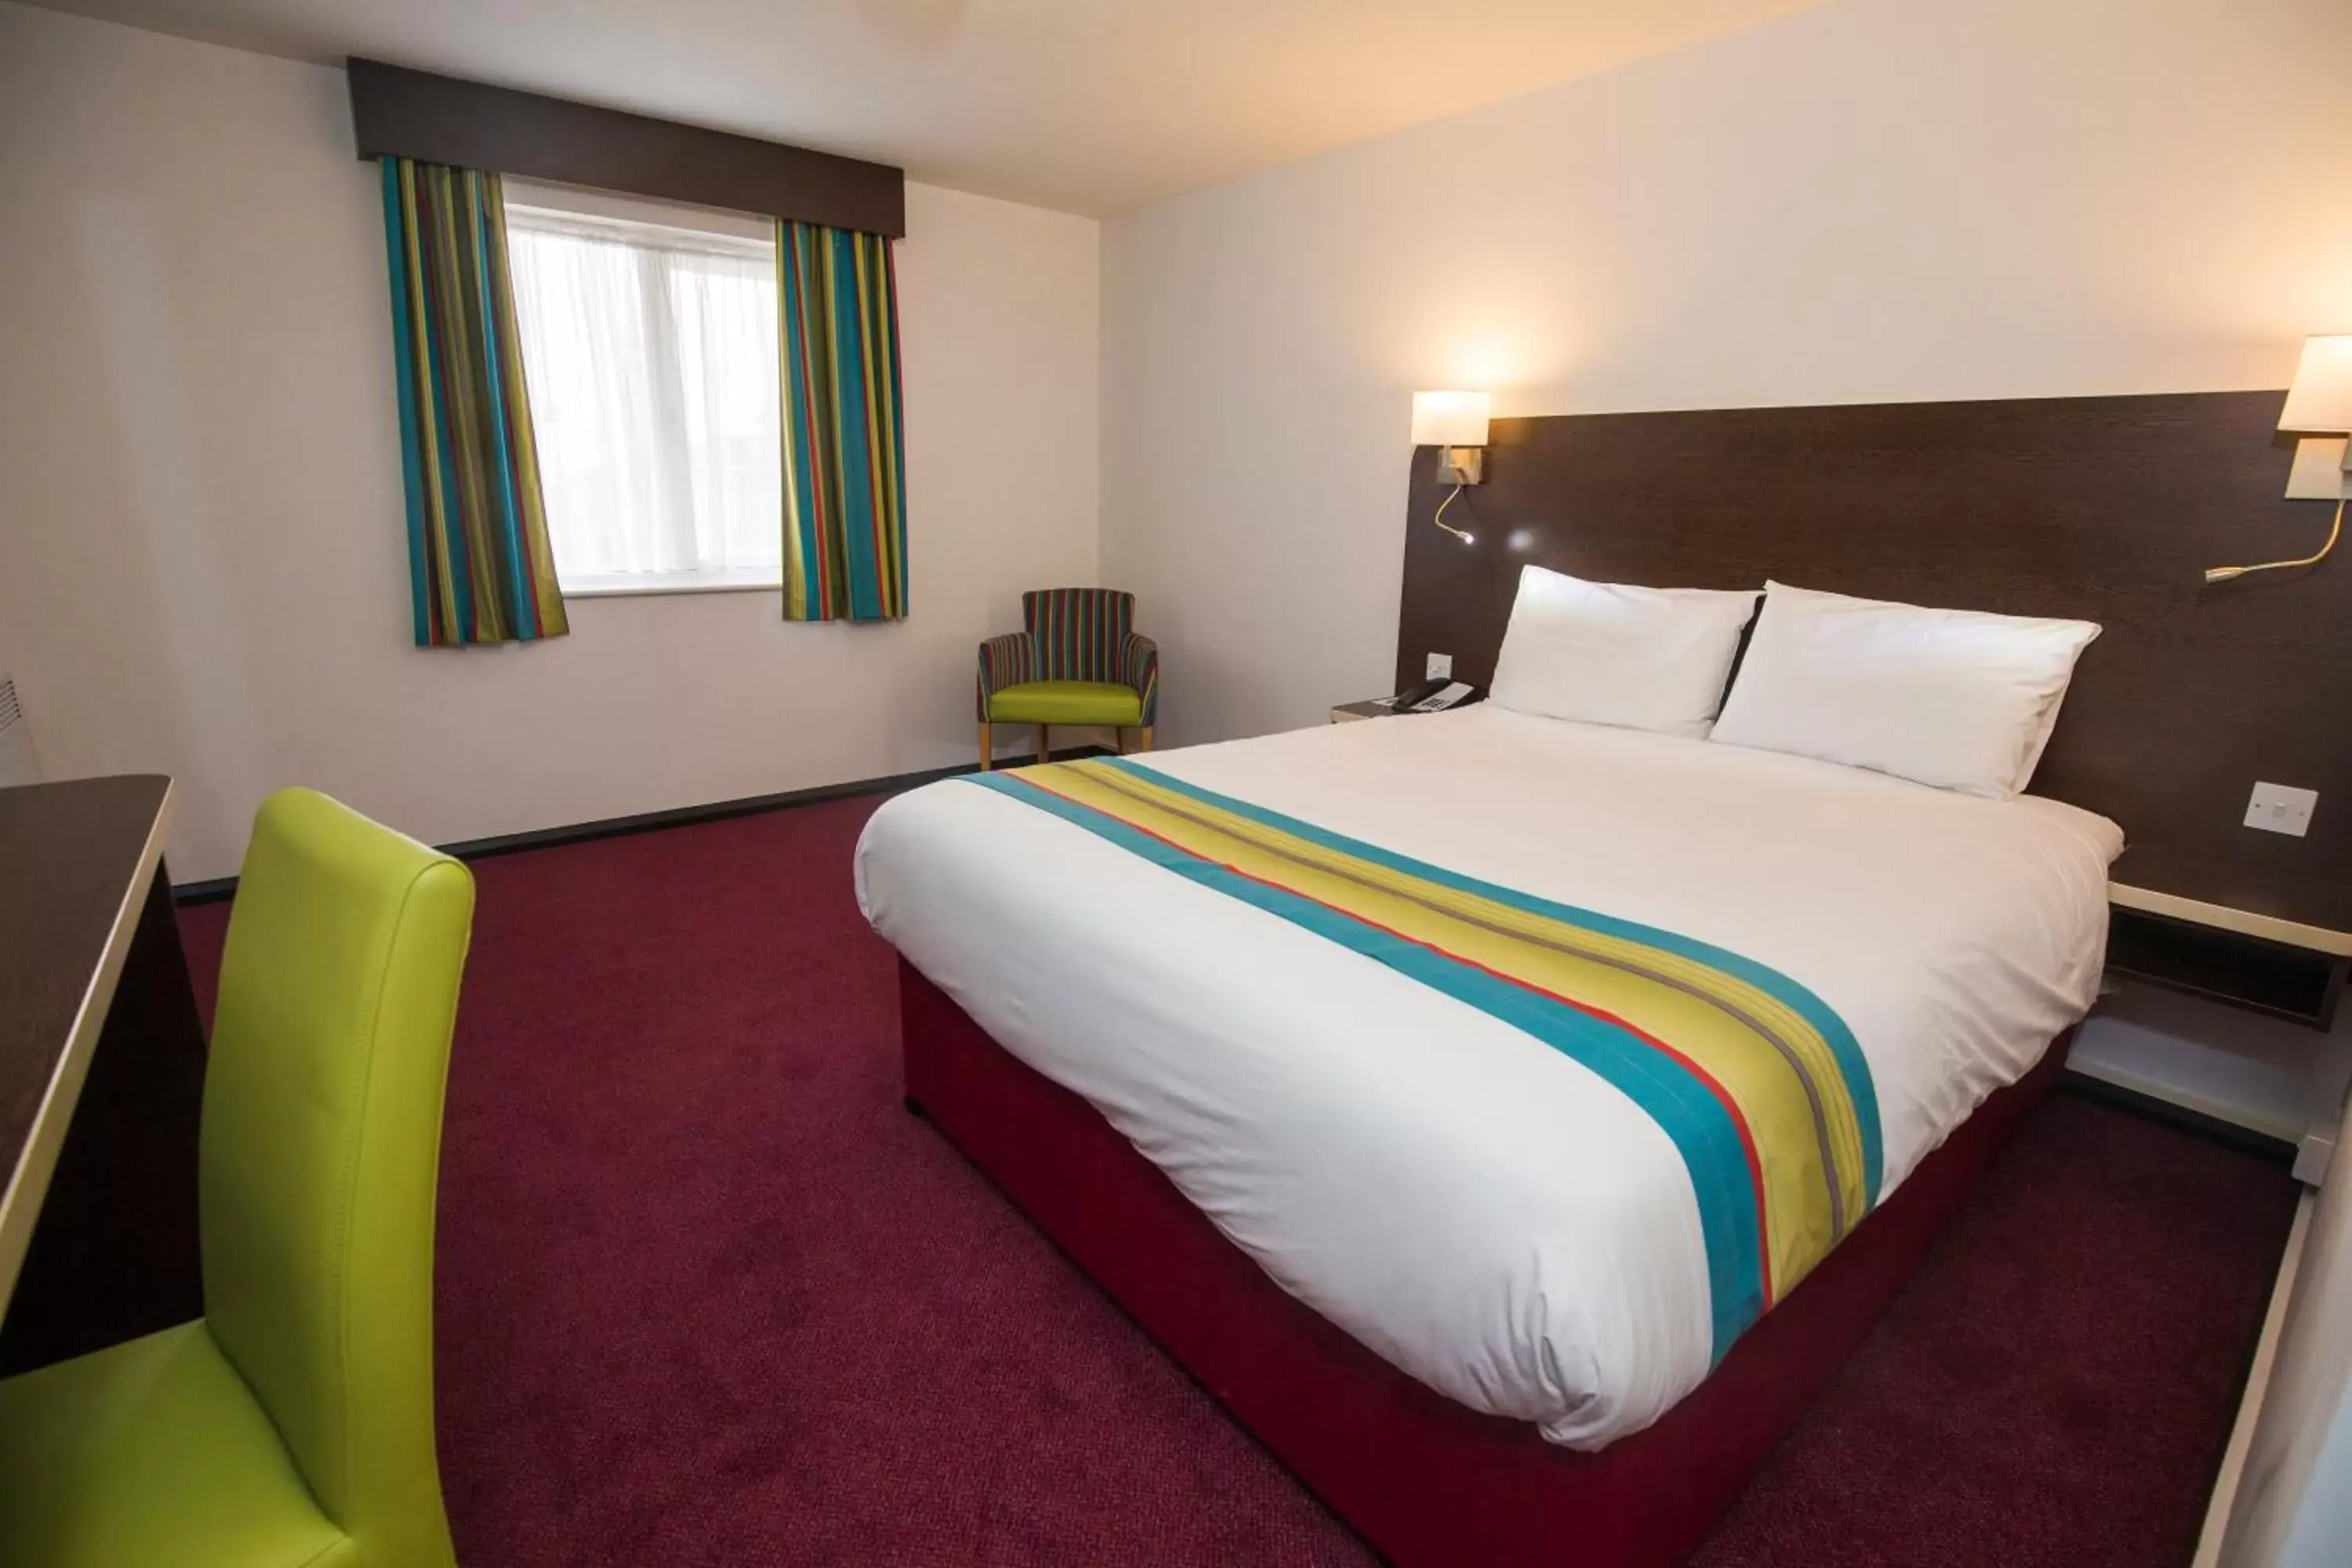 Day, Room Photo in Ramada London South Mimms